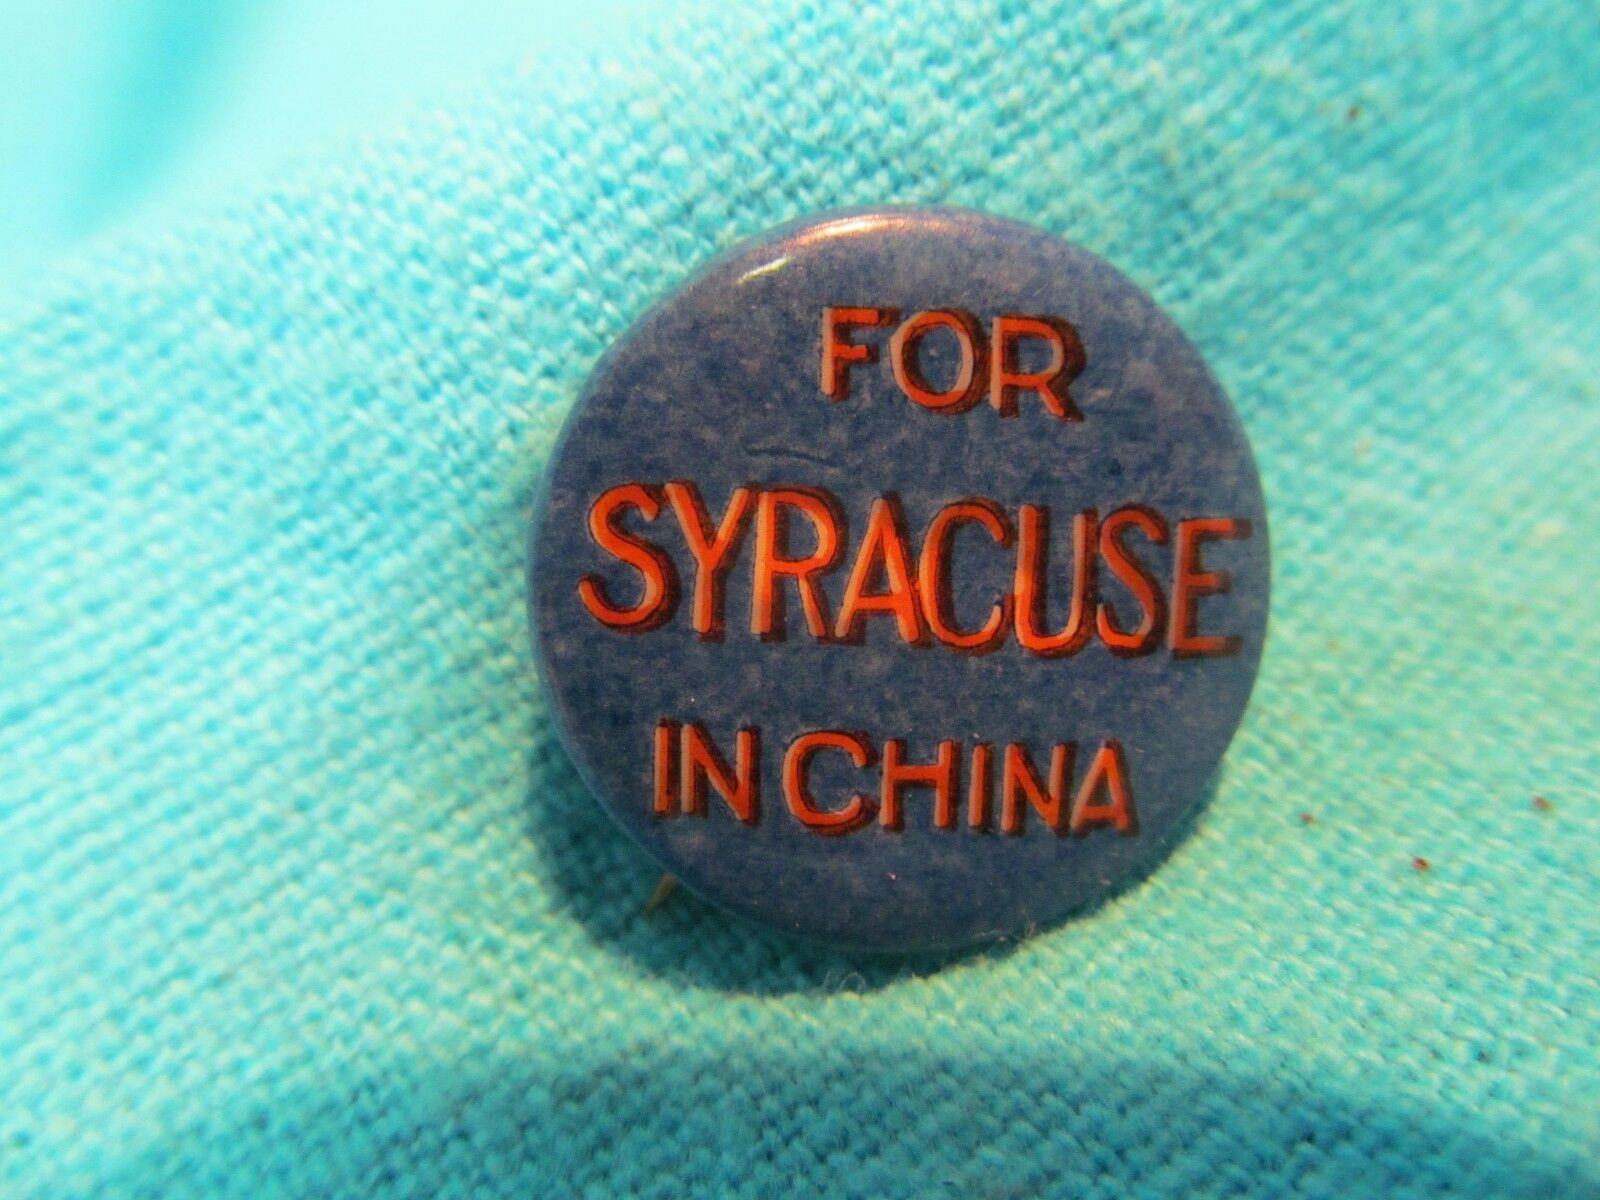 RARE BLUE FOR SYRACUSE IN CHINA SOLICITOR PIN BACK BAINBRIDGE BADGES & BUTTONS